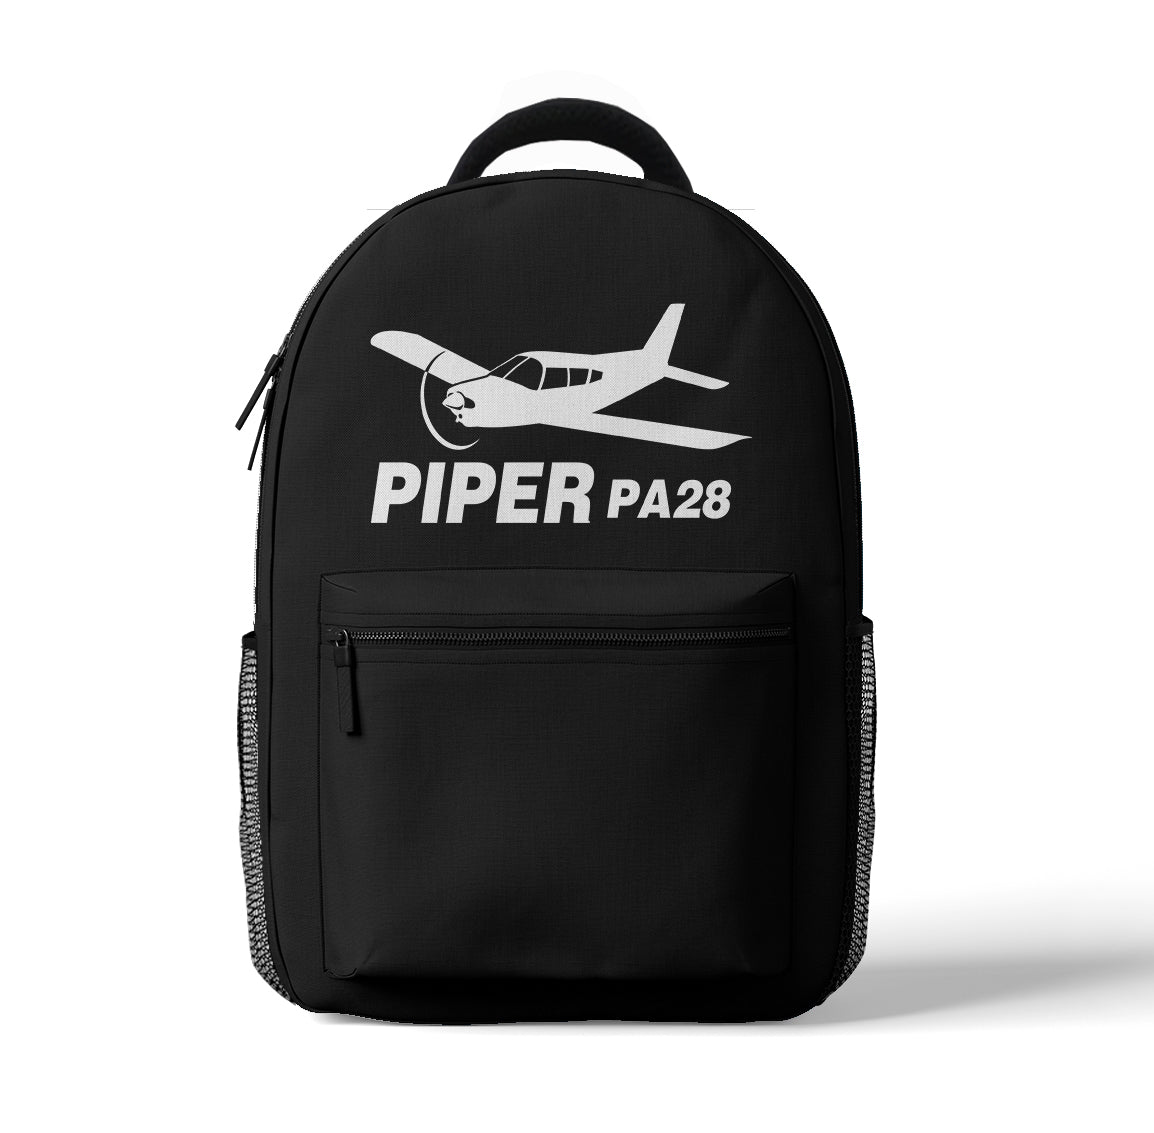 The Piper PA28 Designed 3D Backpacks